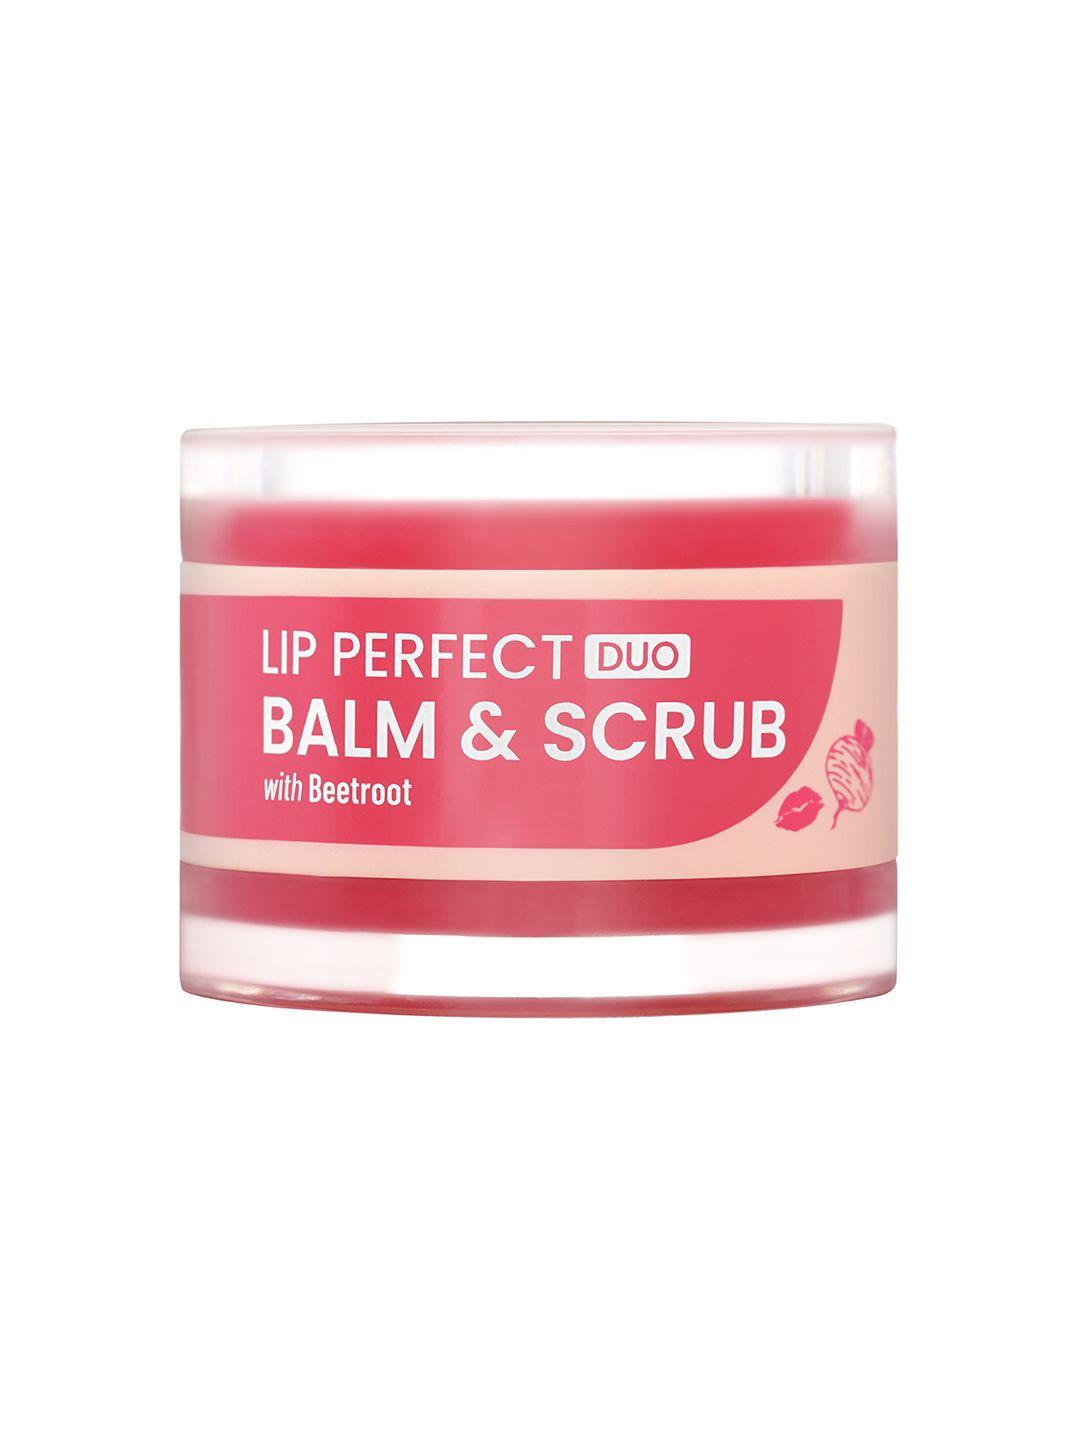 swiss beauty lip perfect duo balm & scrub with beetroot extract - 7 g